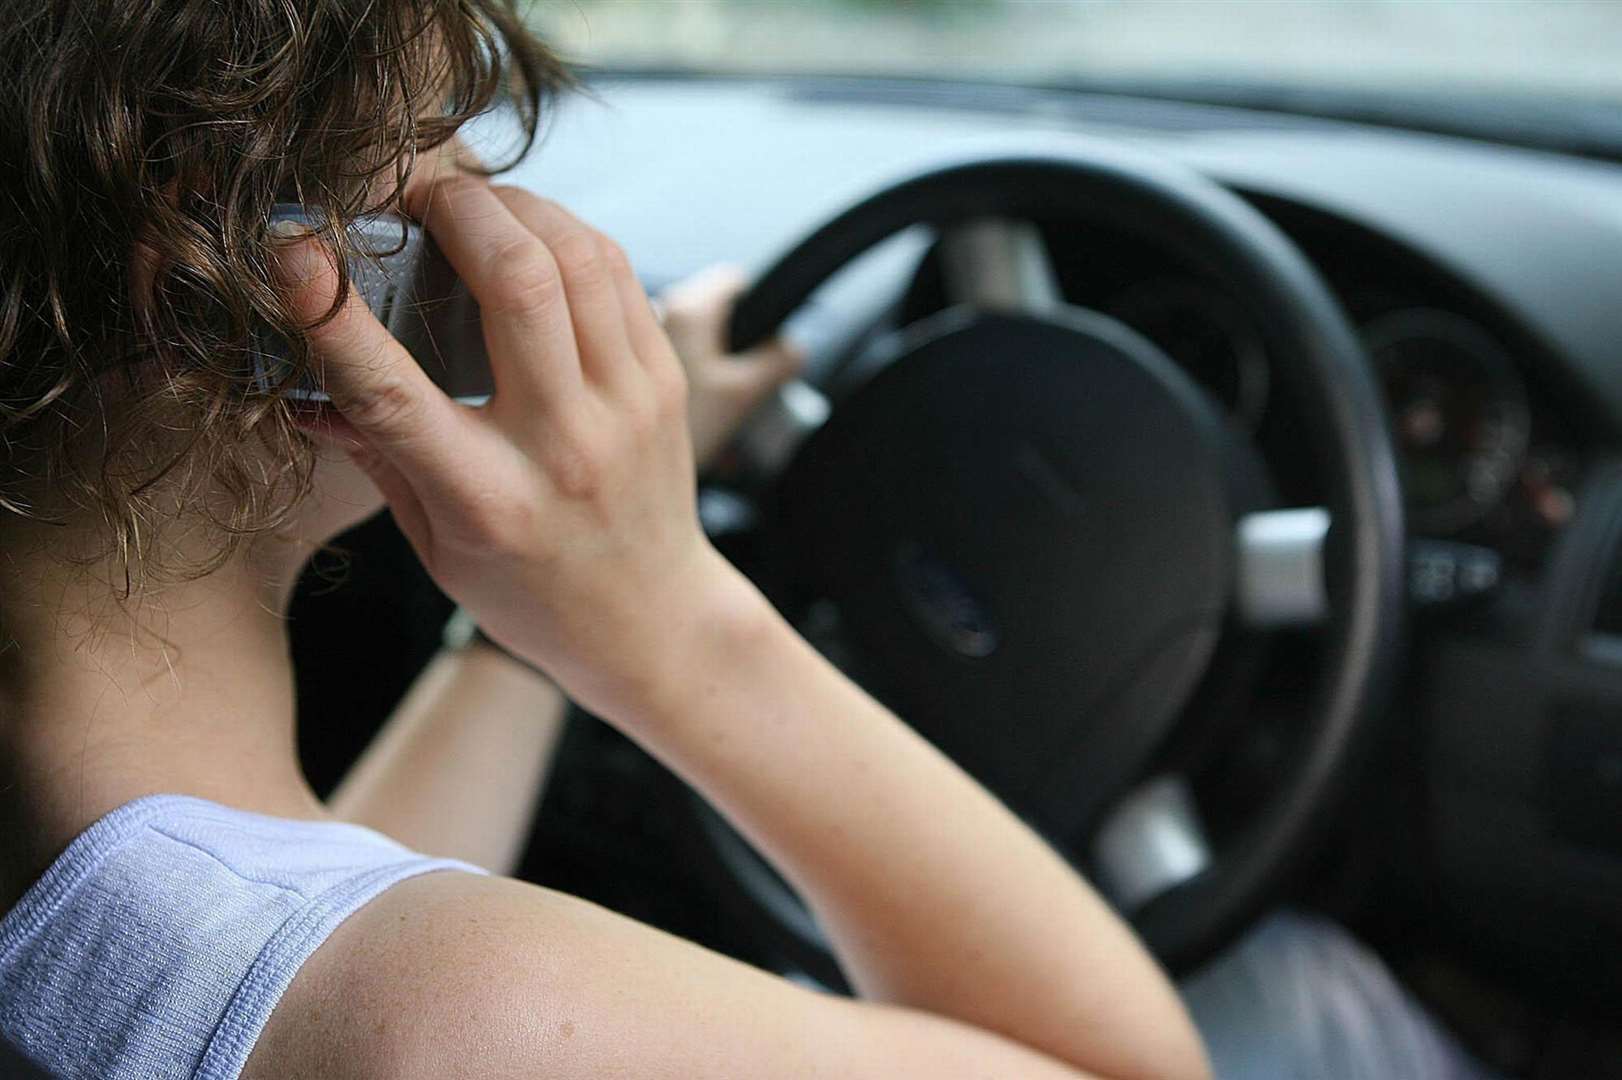 Drivers face £200 fixed penalty notices and points if caught